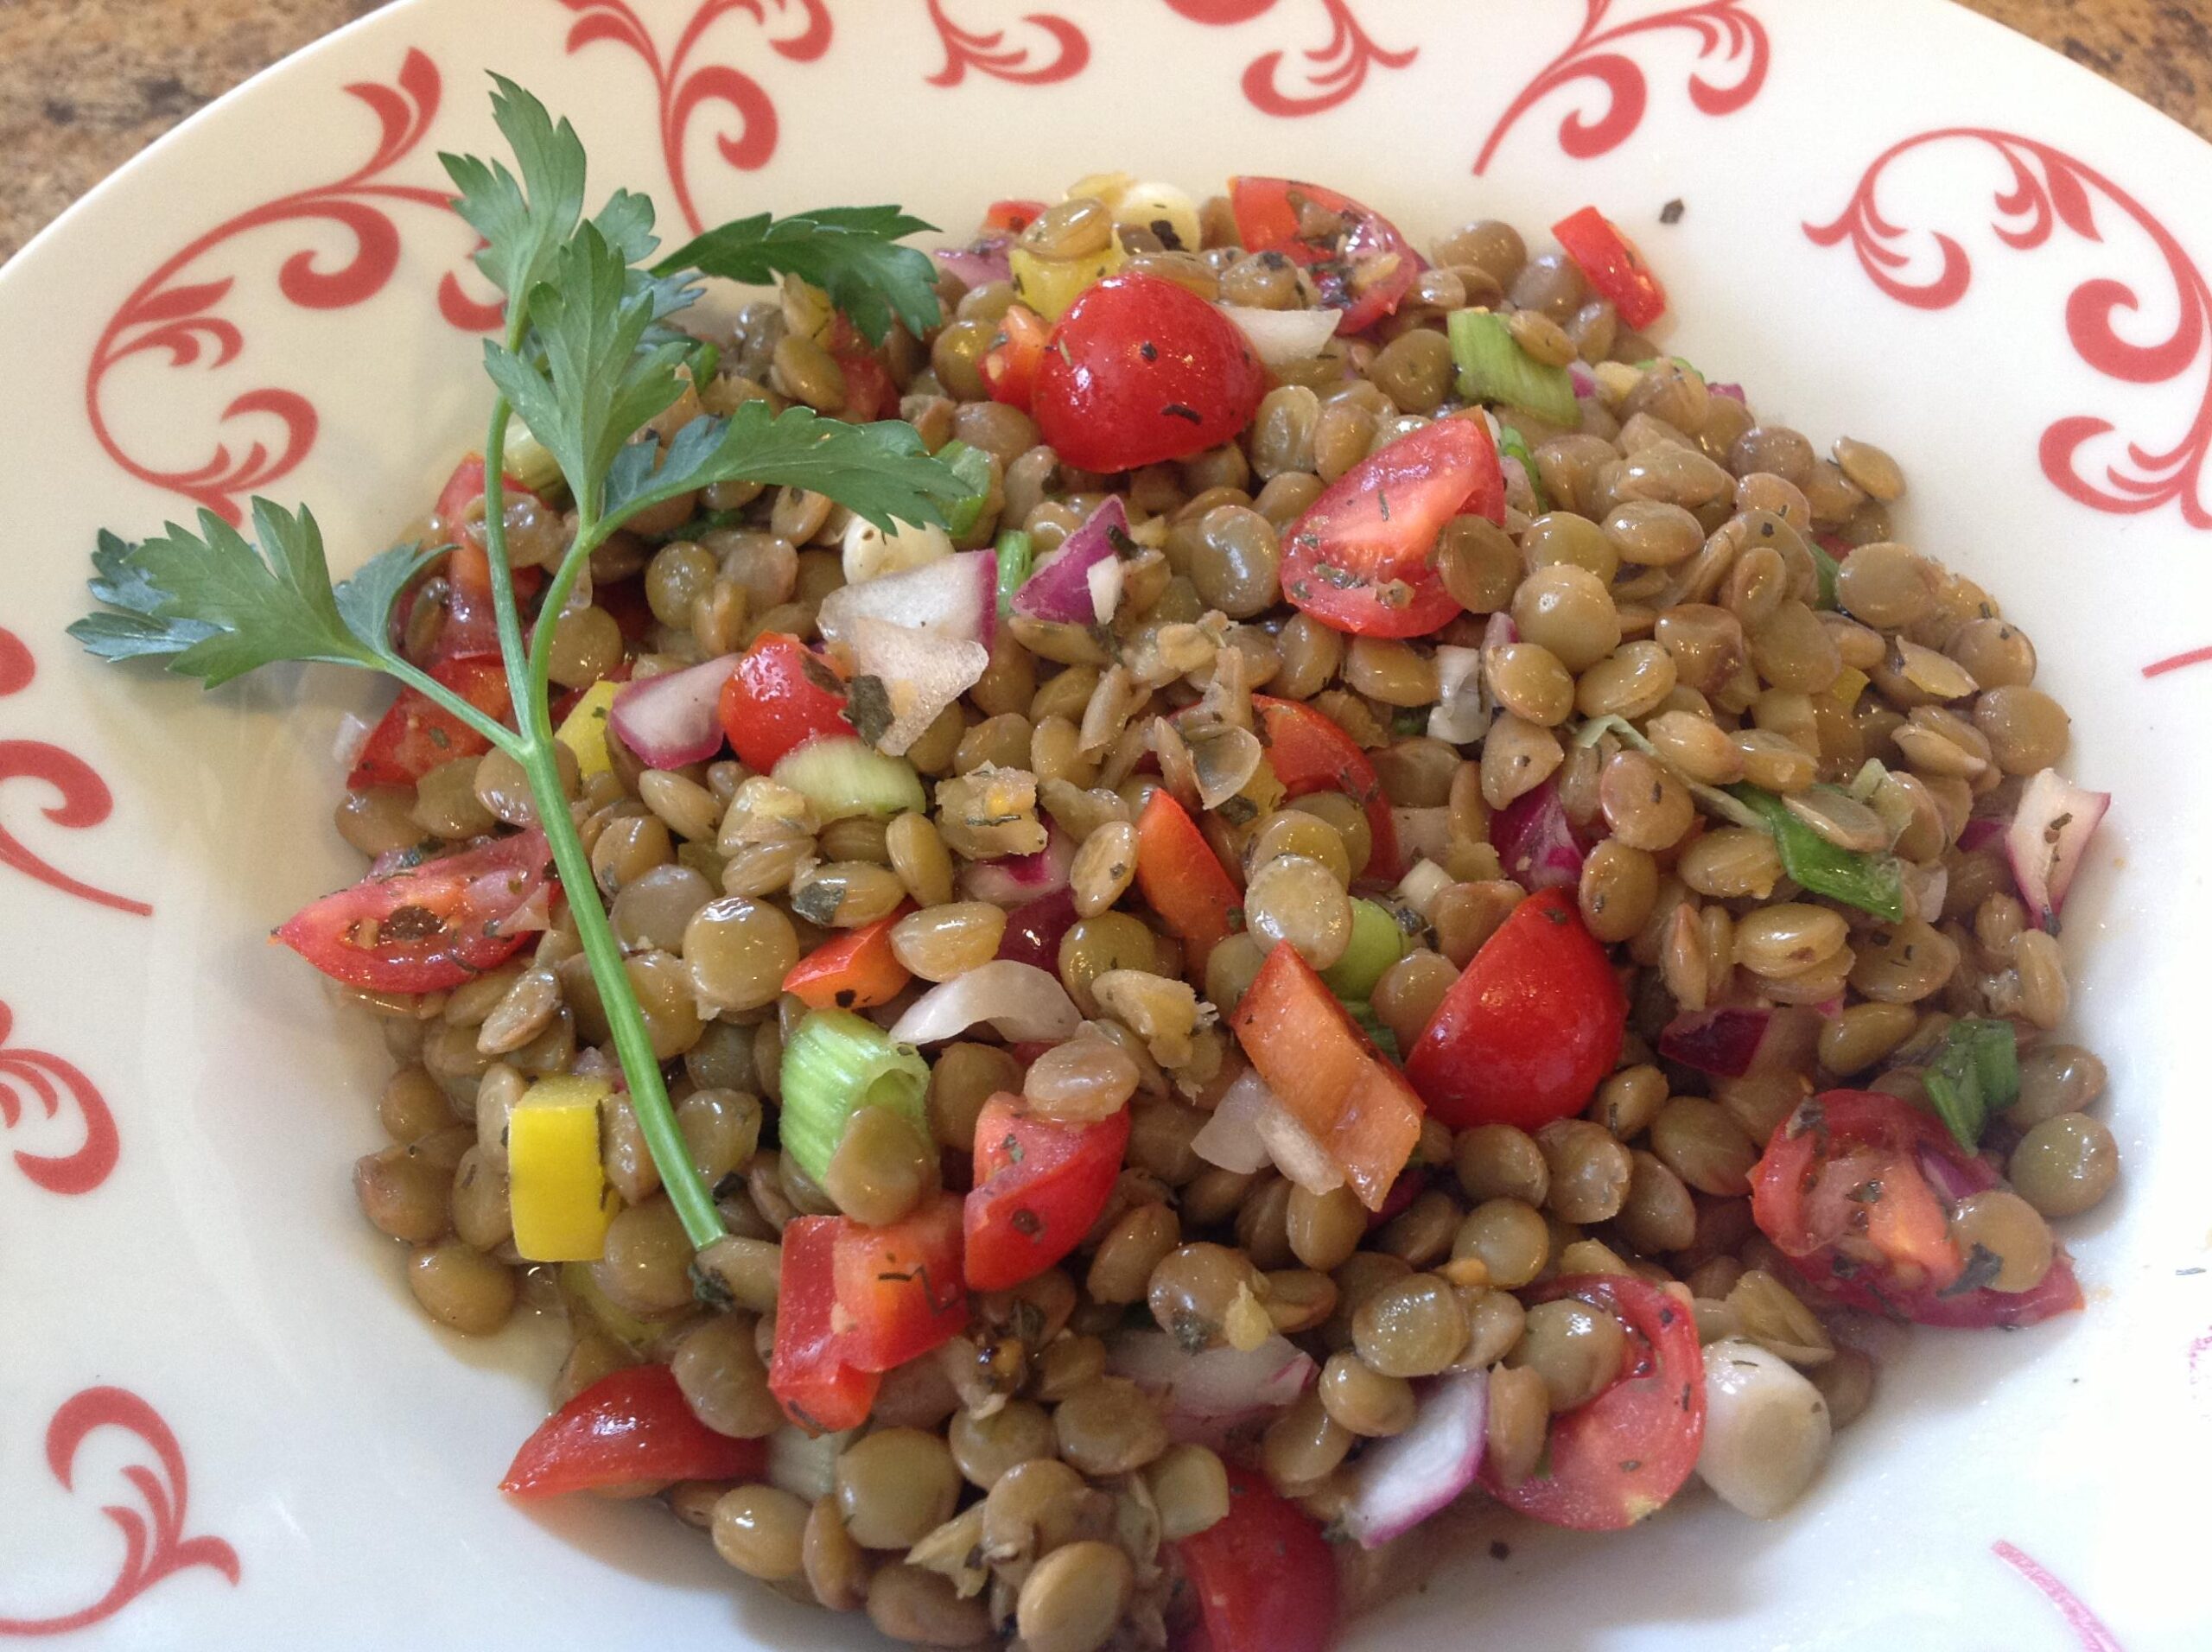 Delicious Lentil Salad Recipe with Fresh Tomatoes and Herbs